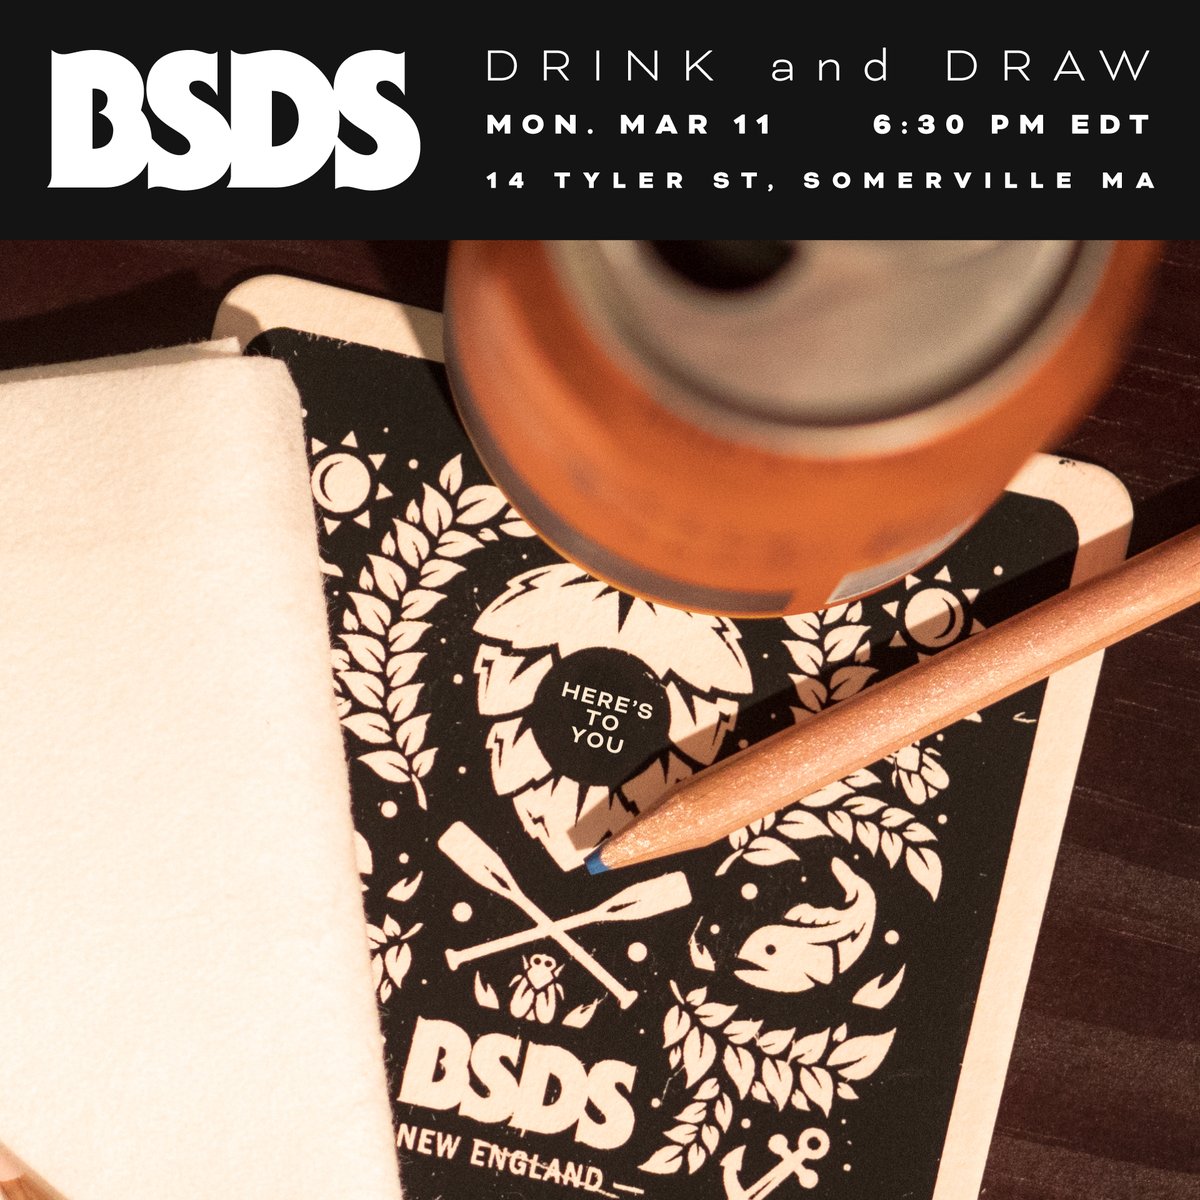 I haven't posted about these in a while, but I'm hosting the last planned @BSDS_co Drink and Draw tonight at @AeronautBrewing. If you're in the area, come hang out and have a good time with us one more time. Drink, draw, and be merry. ✏️